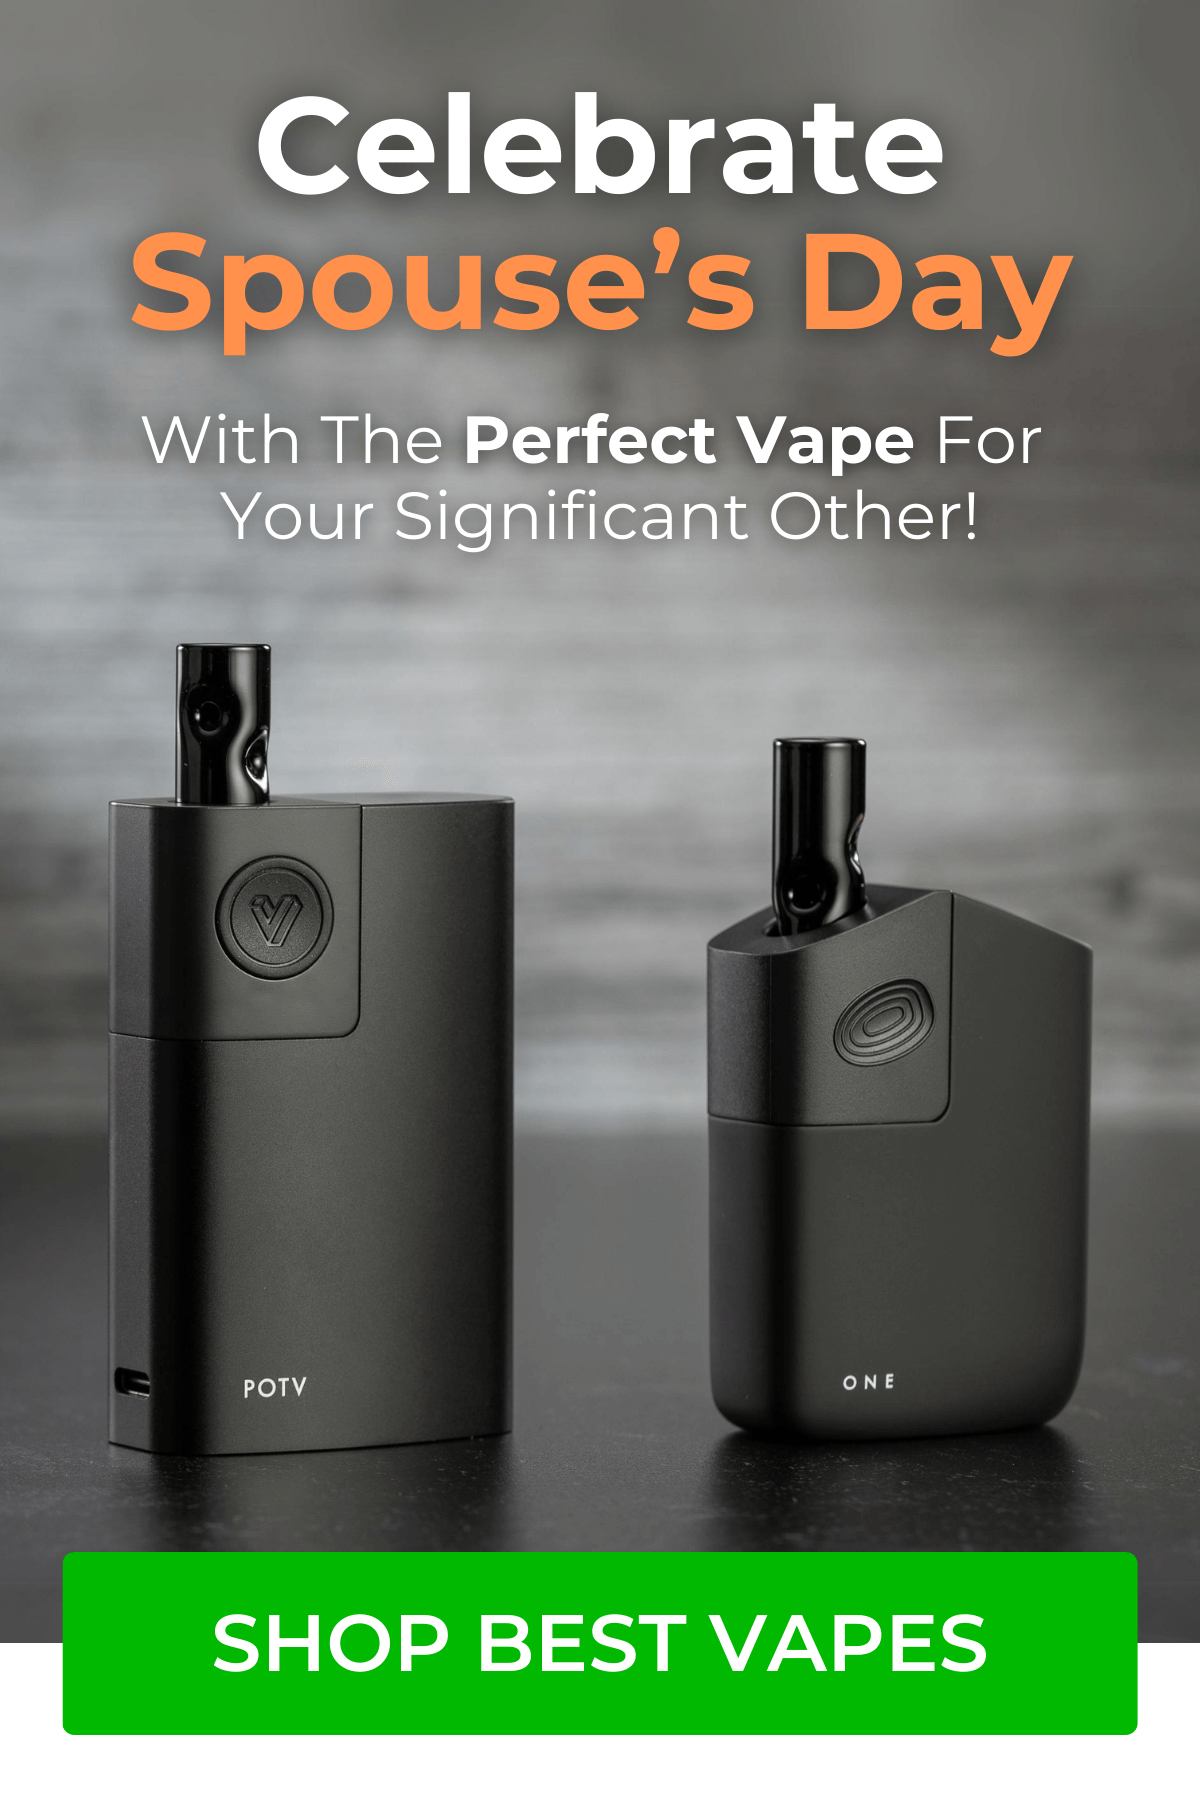 Celebrate Spouse’s Day With The Perfect Vapes For Your Significant Other!